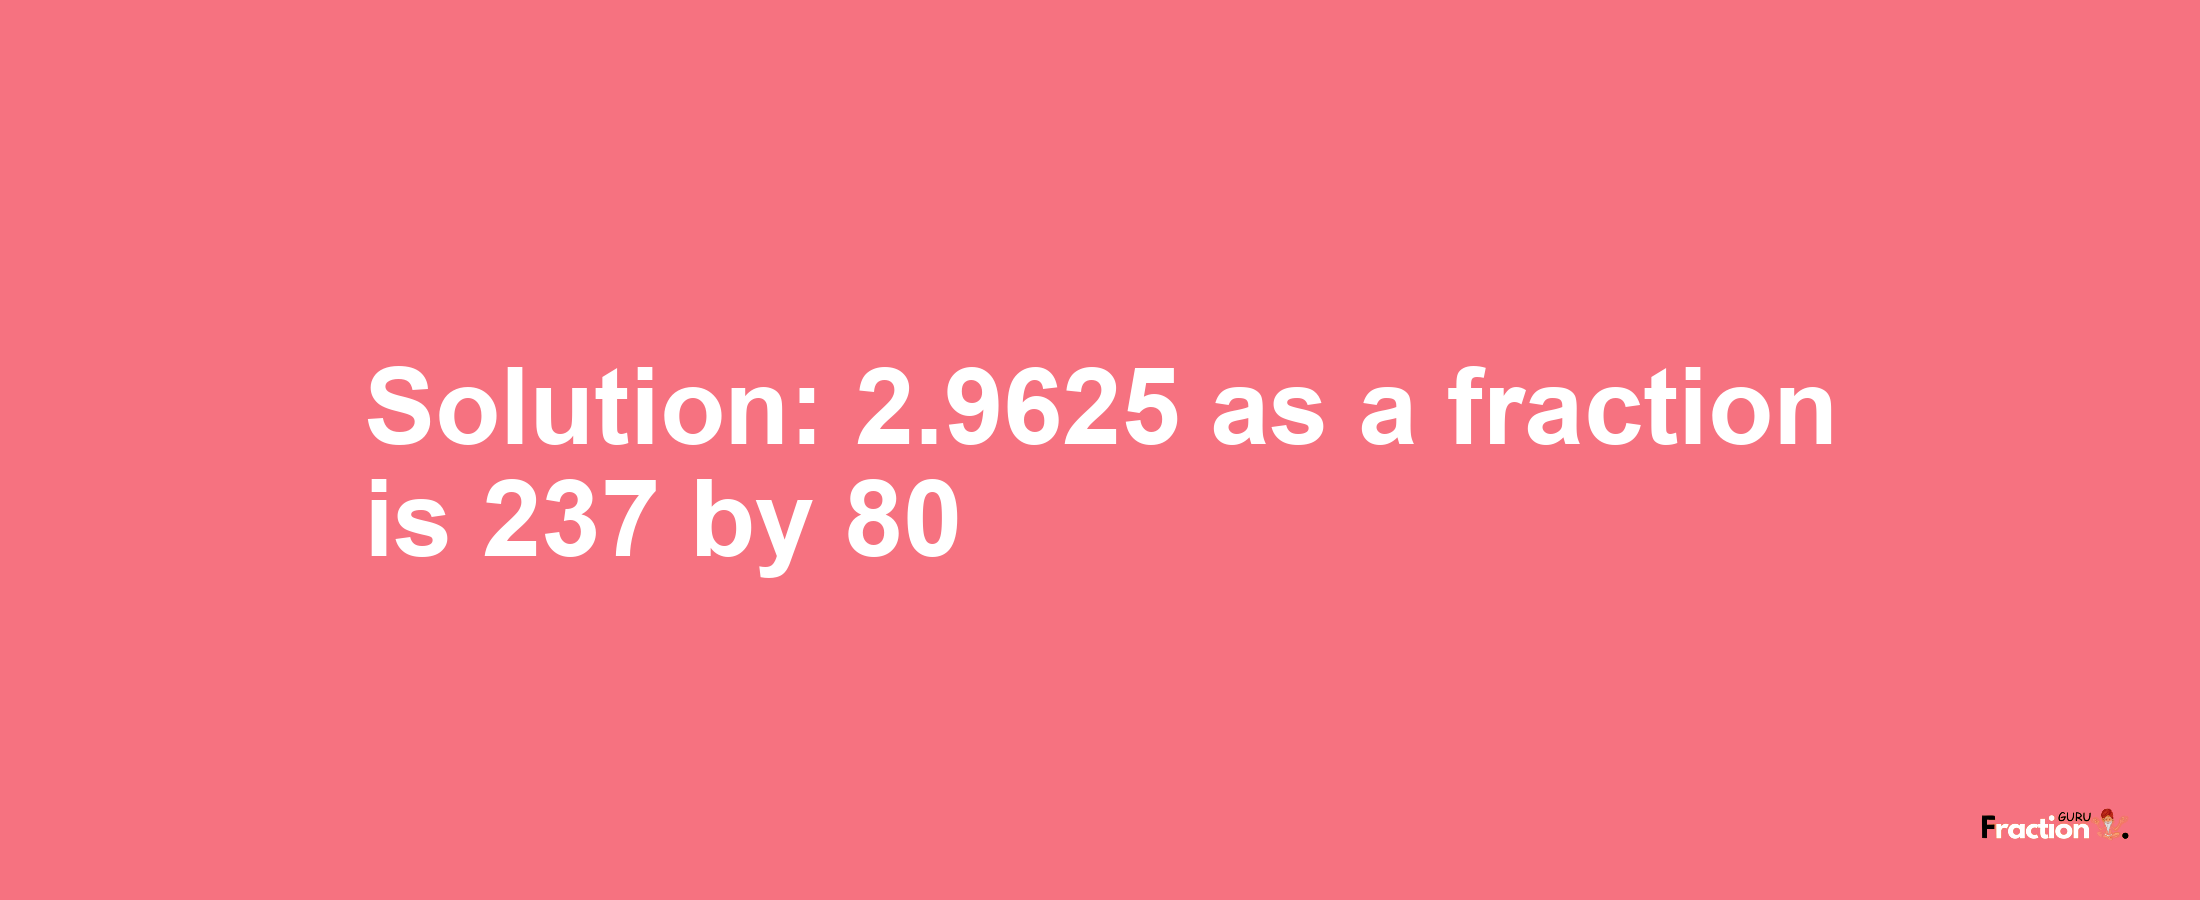 Solution:2.9625 as a fraction is 237/80